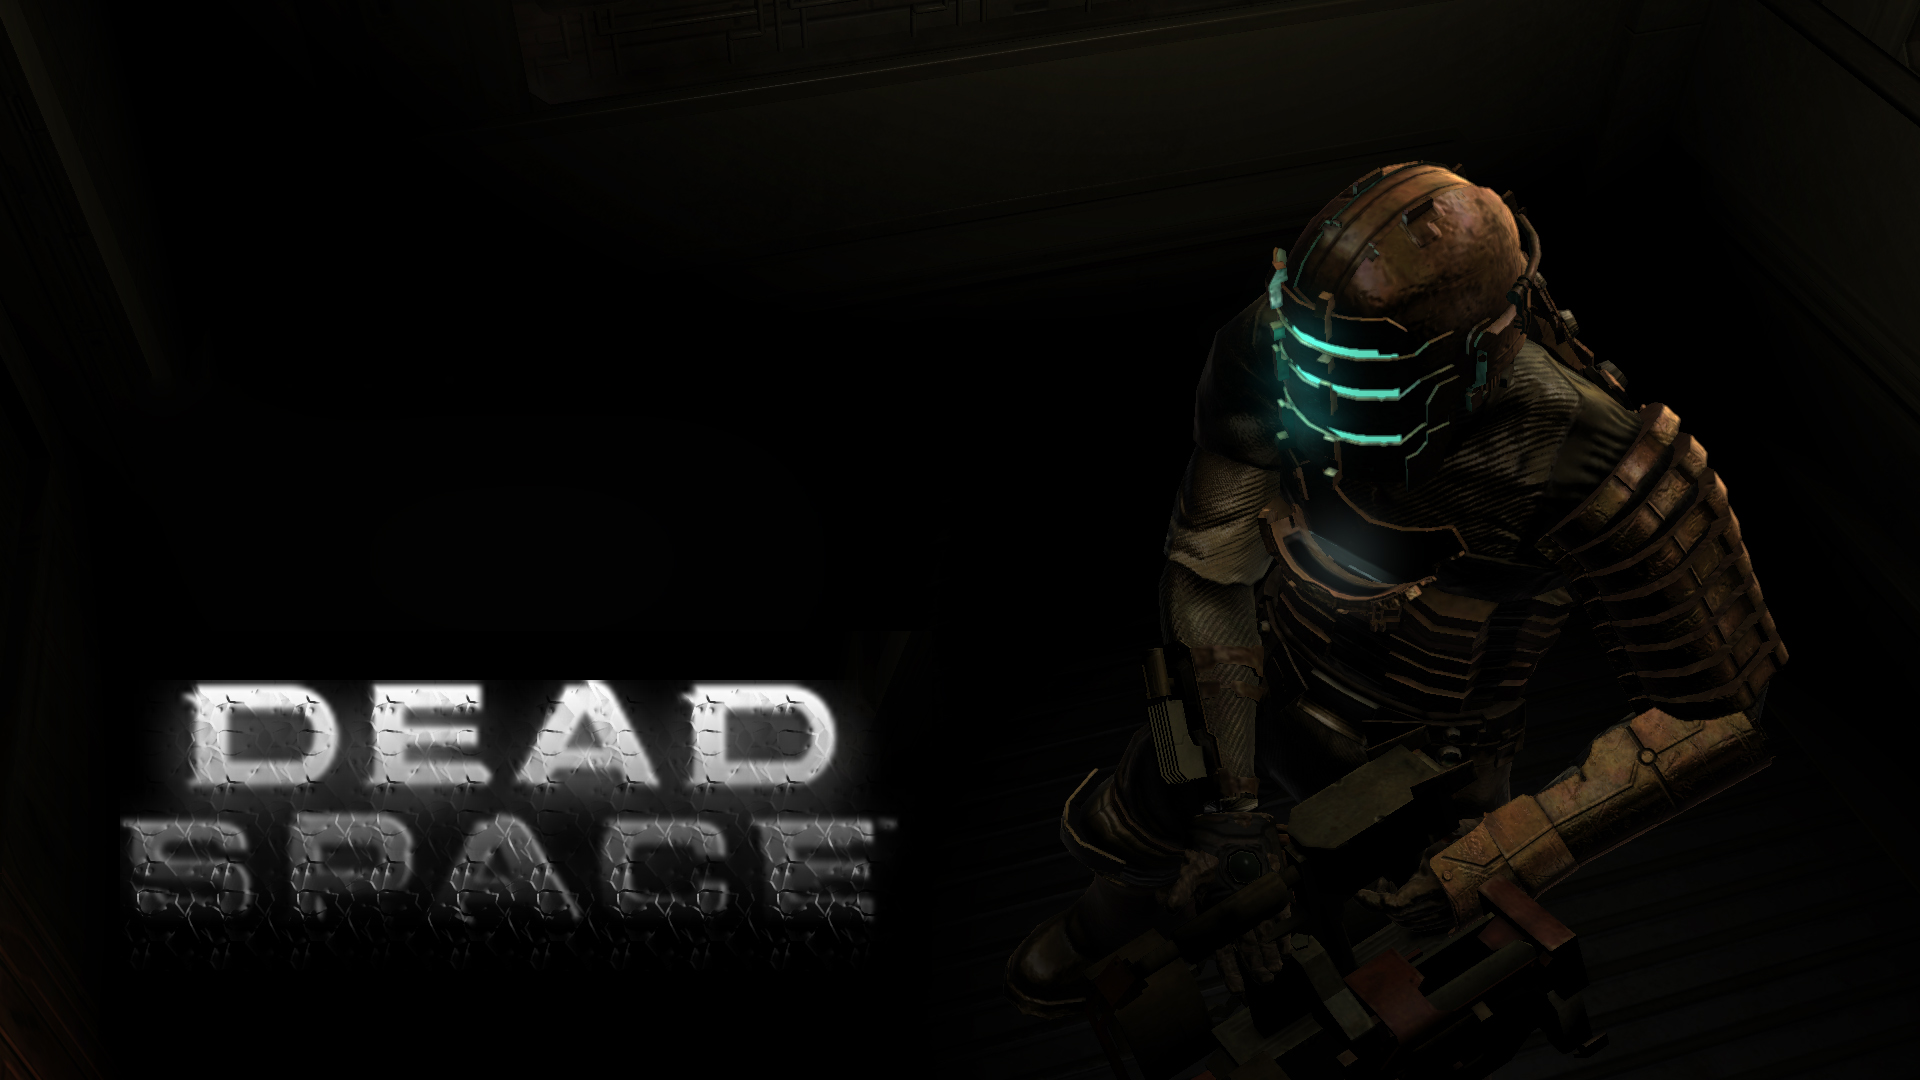 Download Dead Space 3 Wallpapers 29467 1920x1080 px High